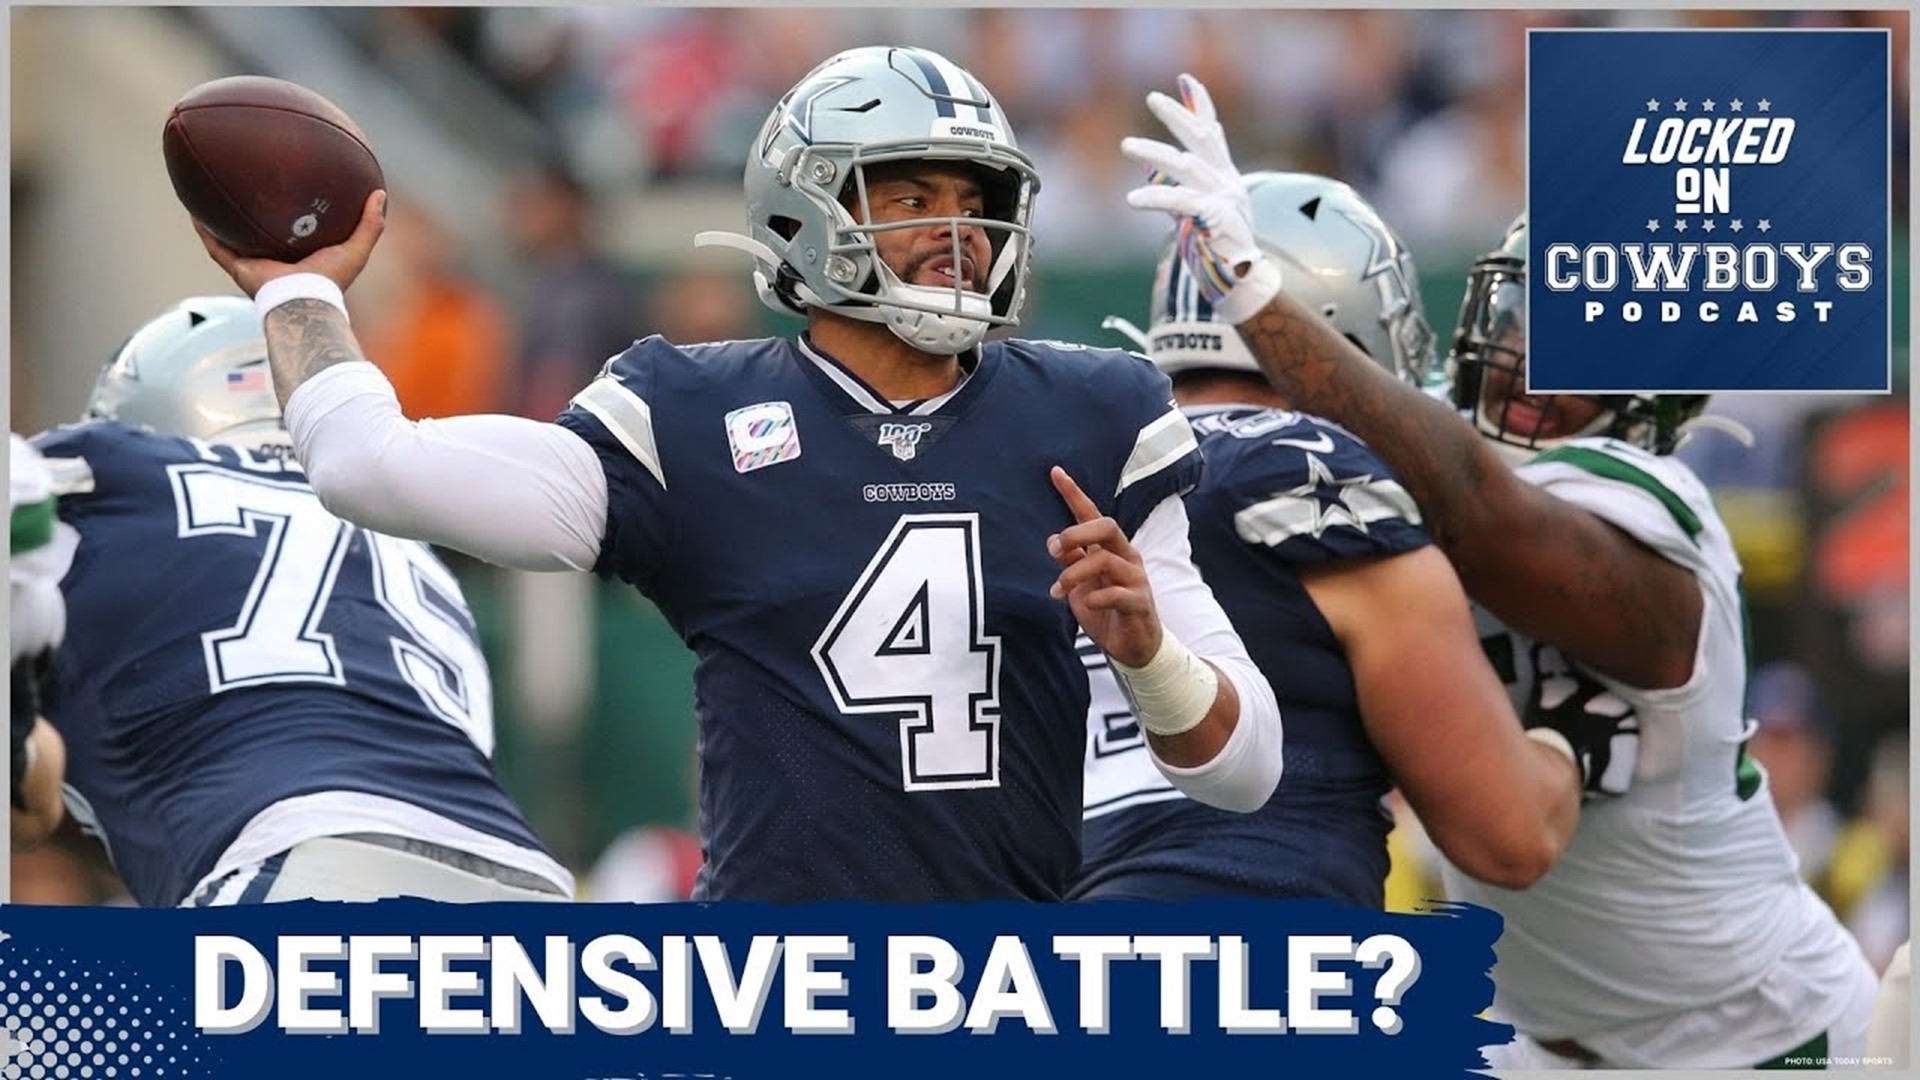 The Dallas Cowboys will host the New York Jets in Week 1. Can the Dallas Cowboys find a way to score 20+ points against one of the NFL's best defense?